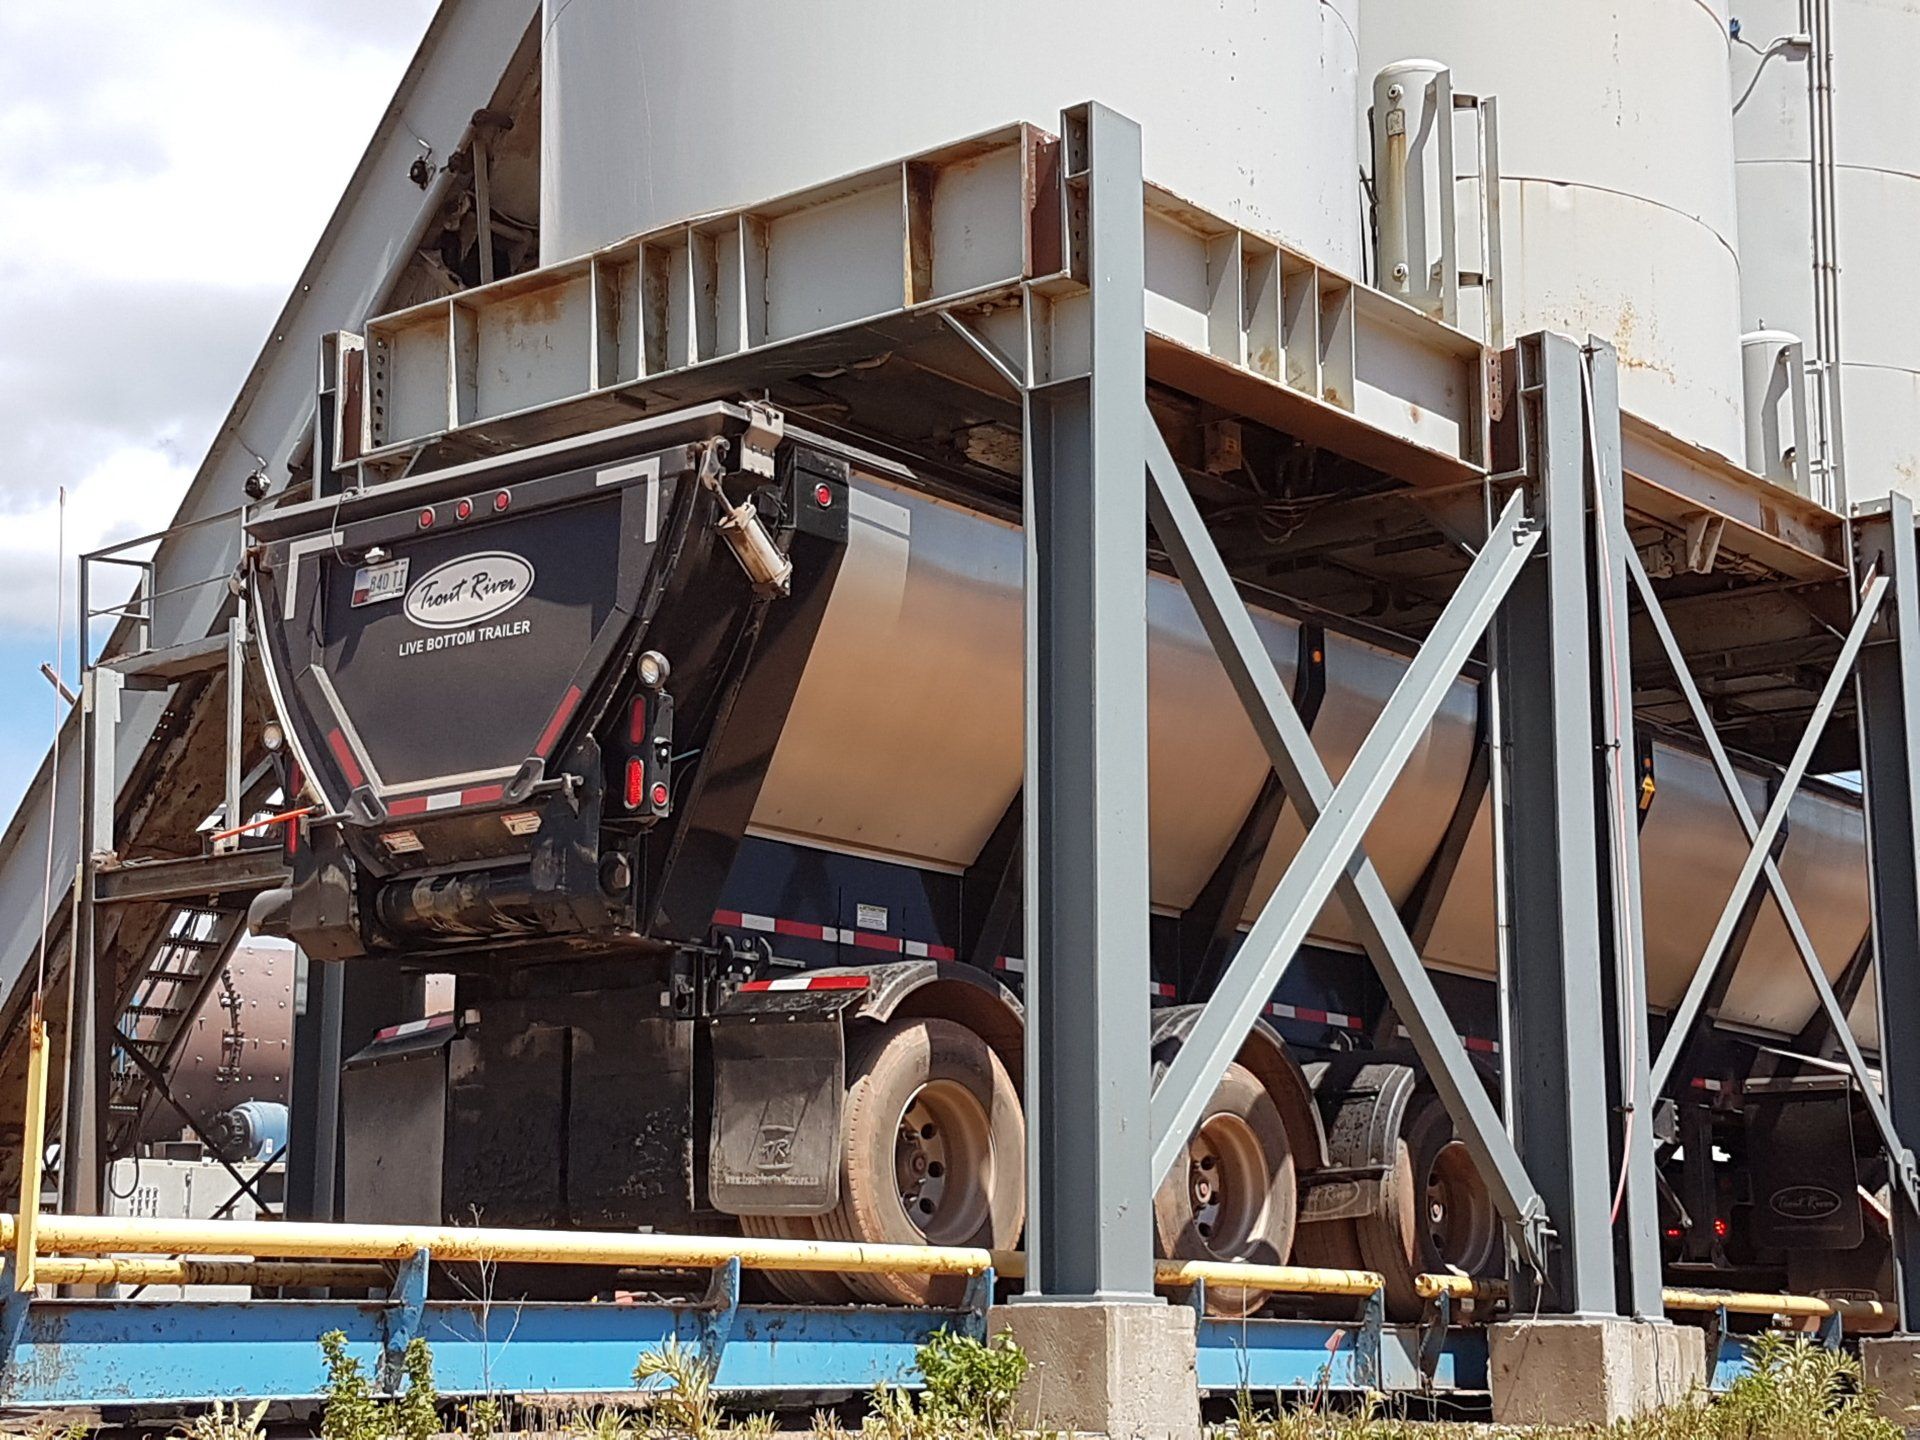 Live Bottom trailer being loaded at a silo